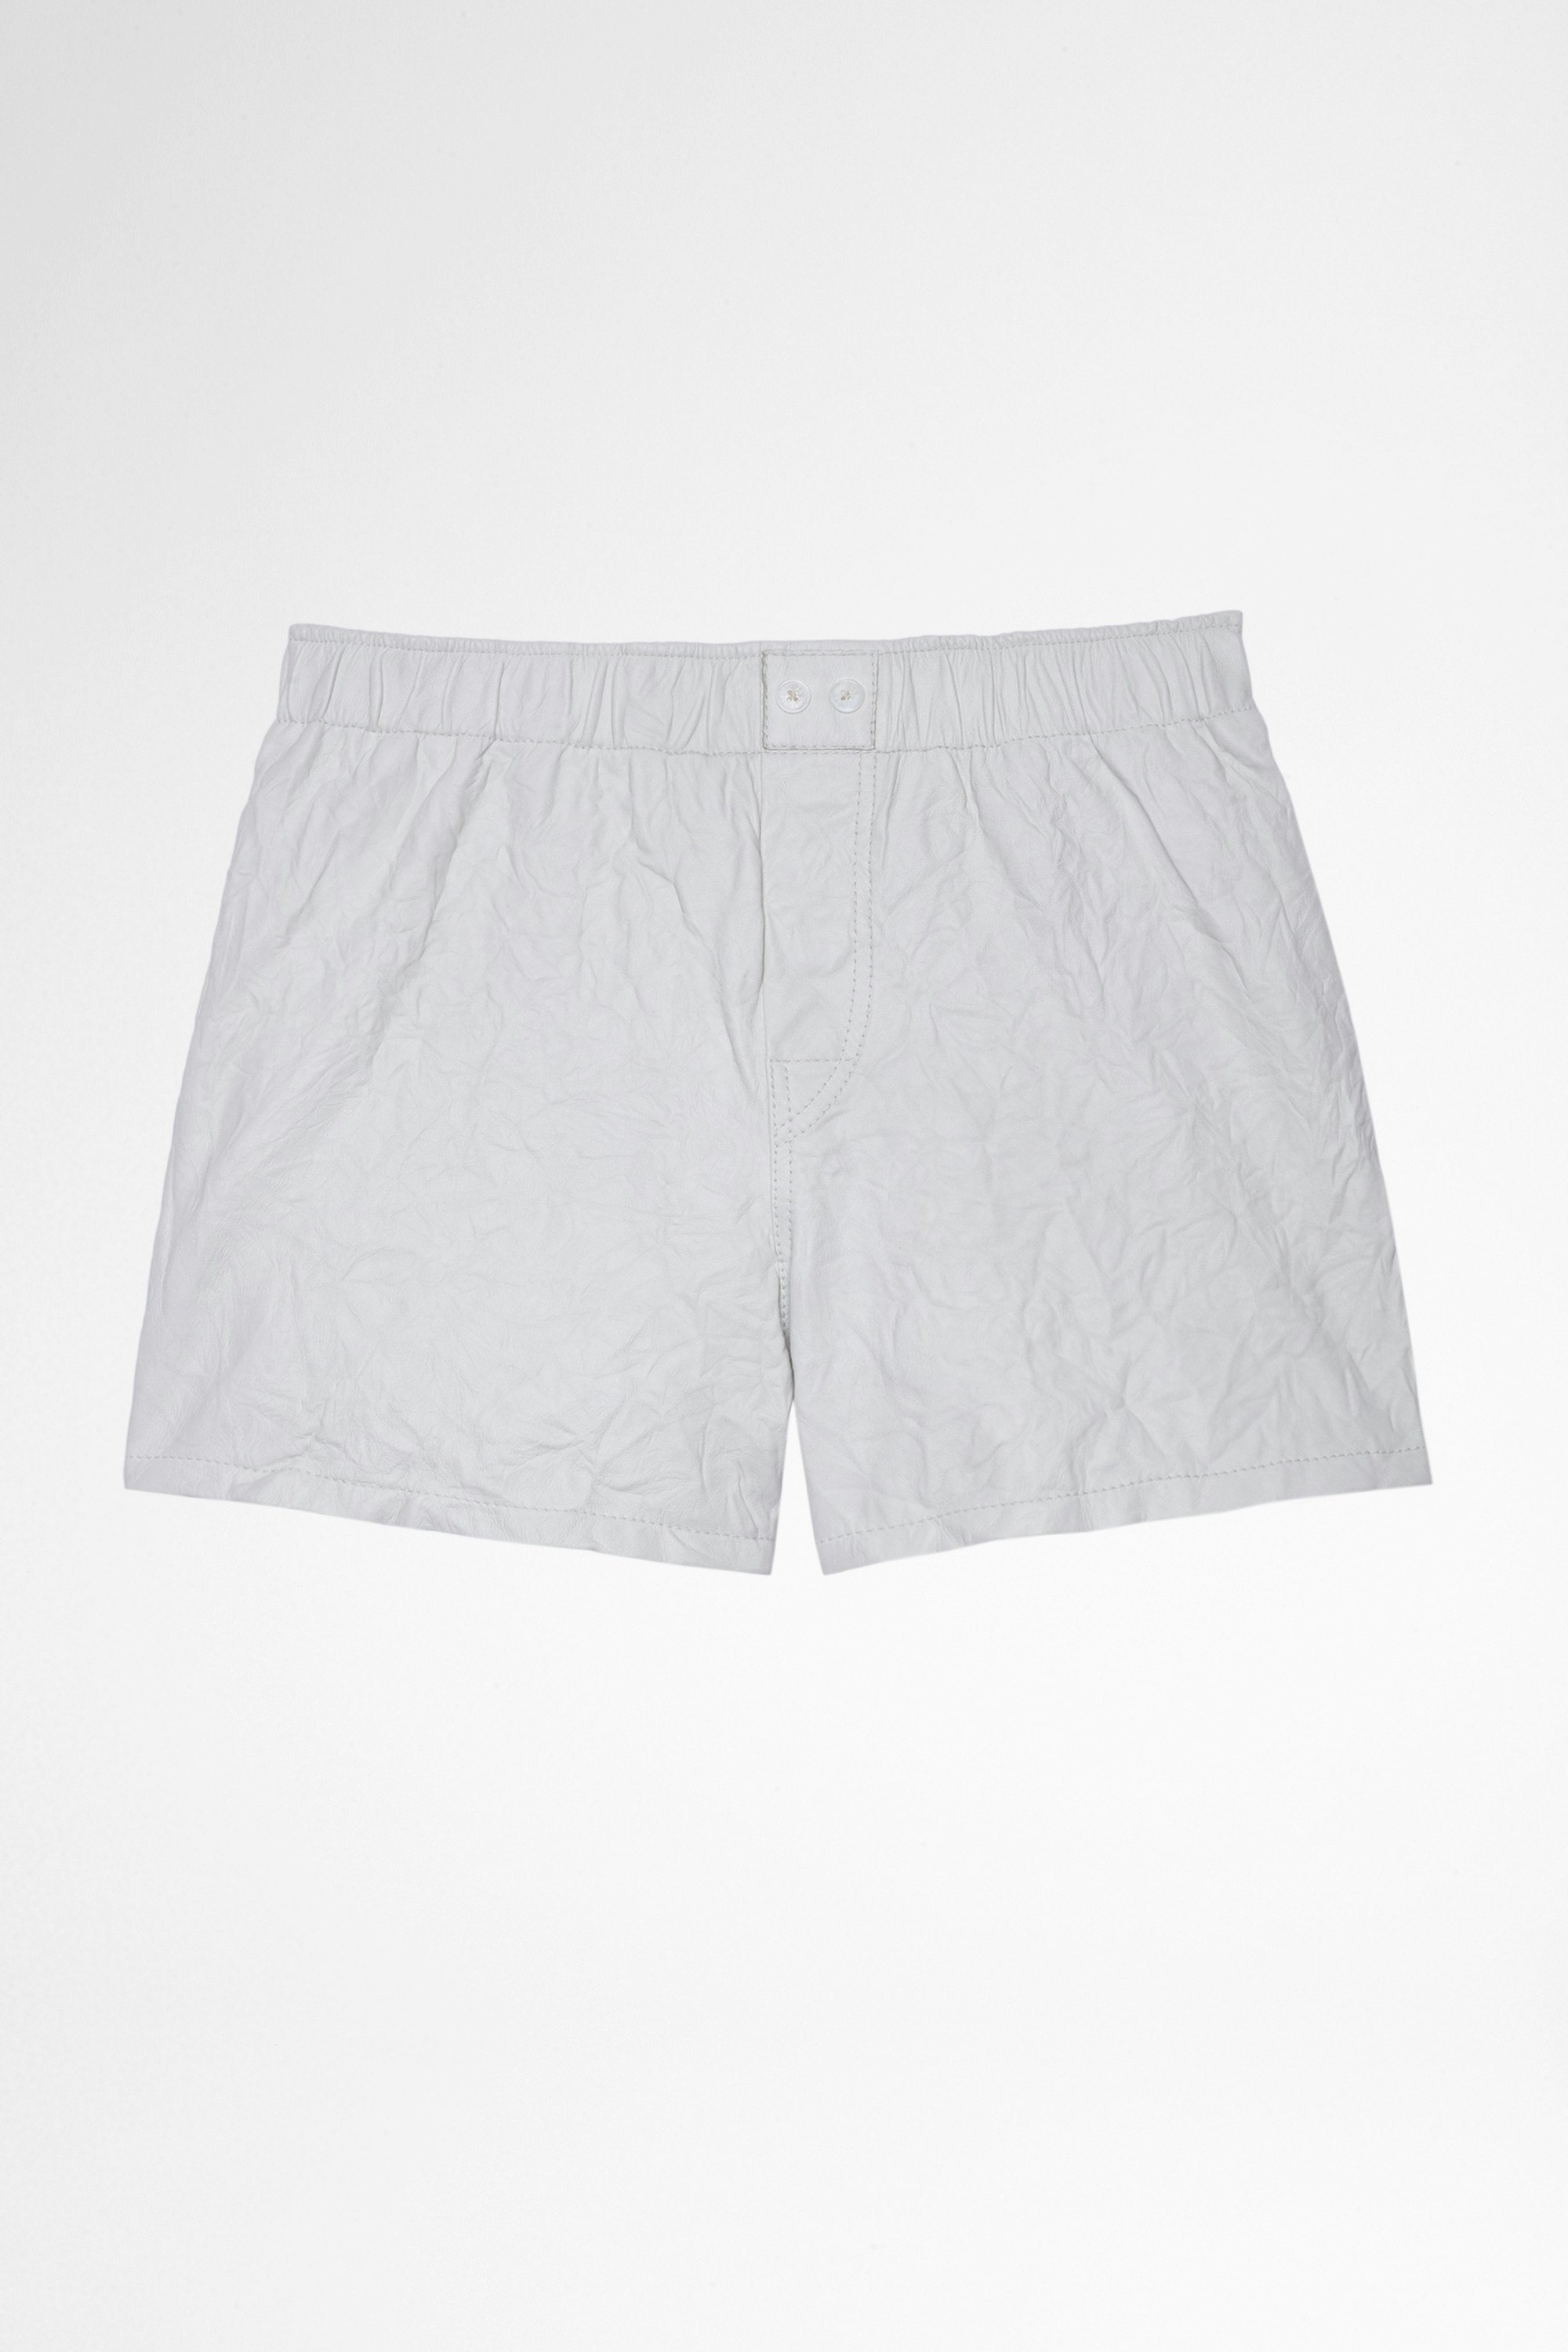 Pax Shorts Crinkled Leather Women's crumpled leather shorts in white